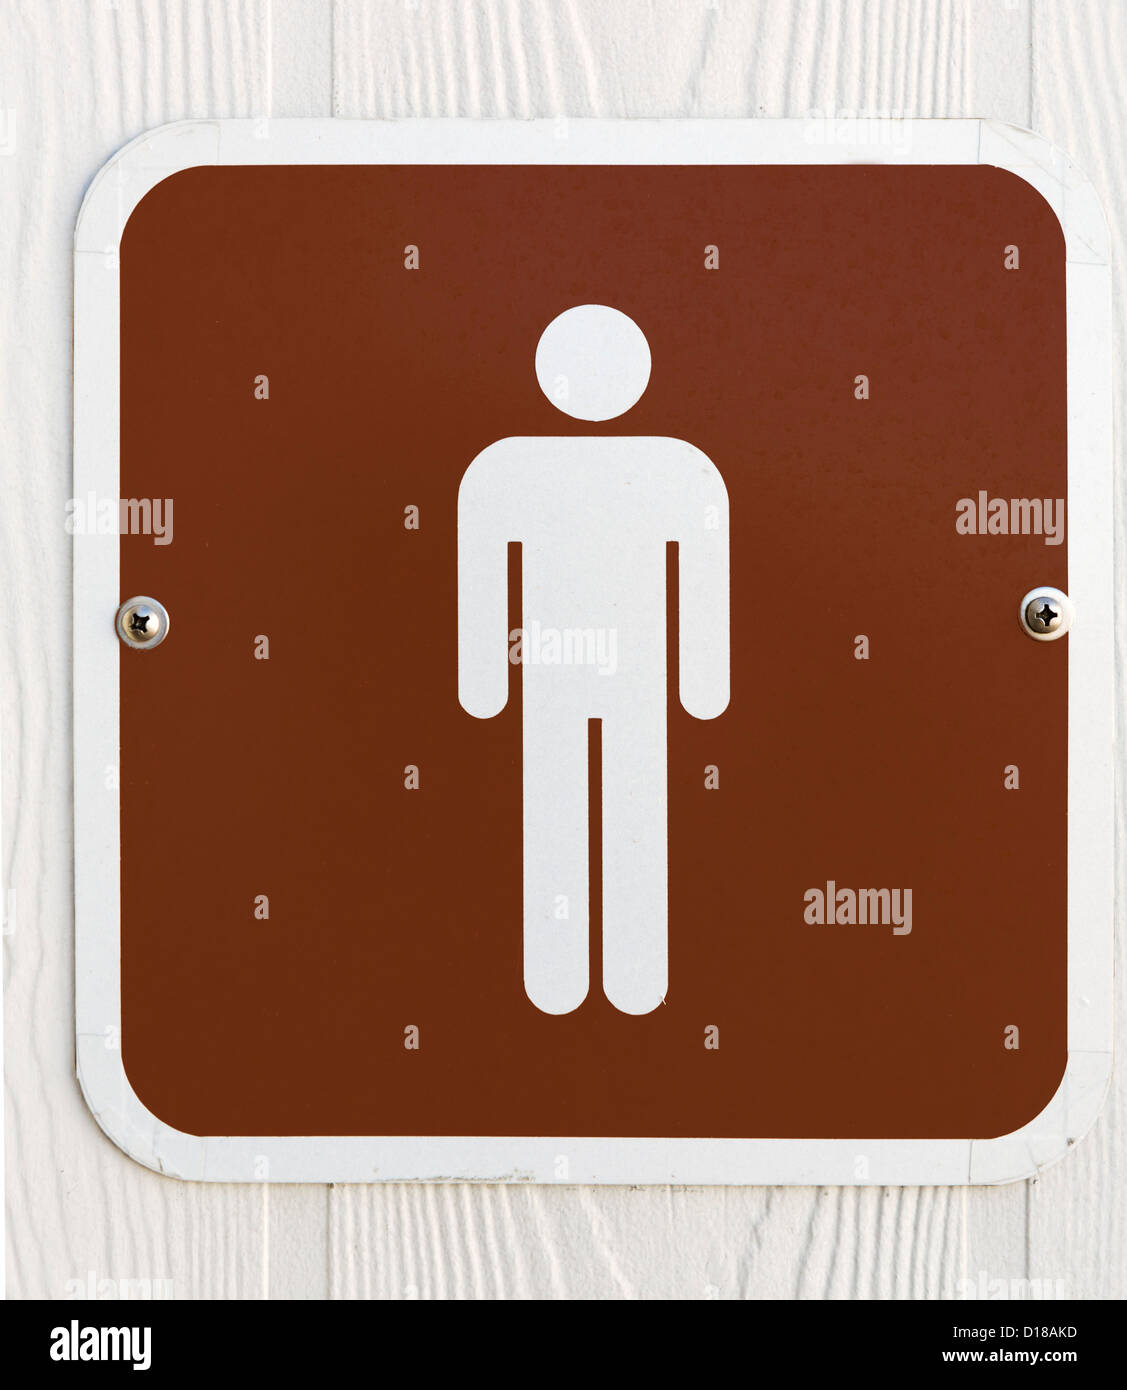 Mens rest room sign, USA Stock Photo